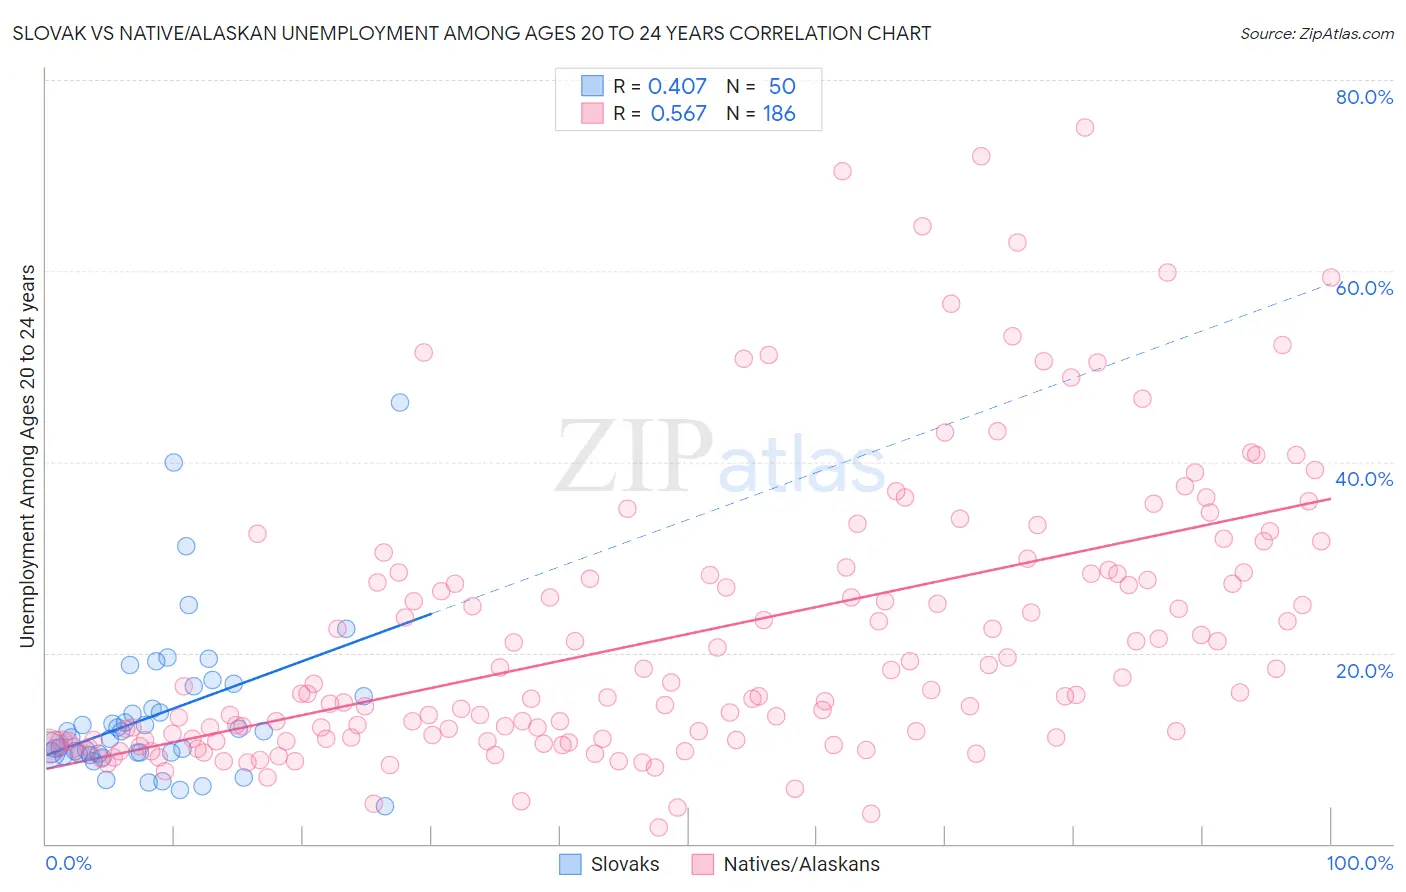 Slovak vs Native/Alaskan Unemployment Among Ages 20 to 24 years